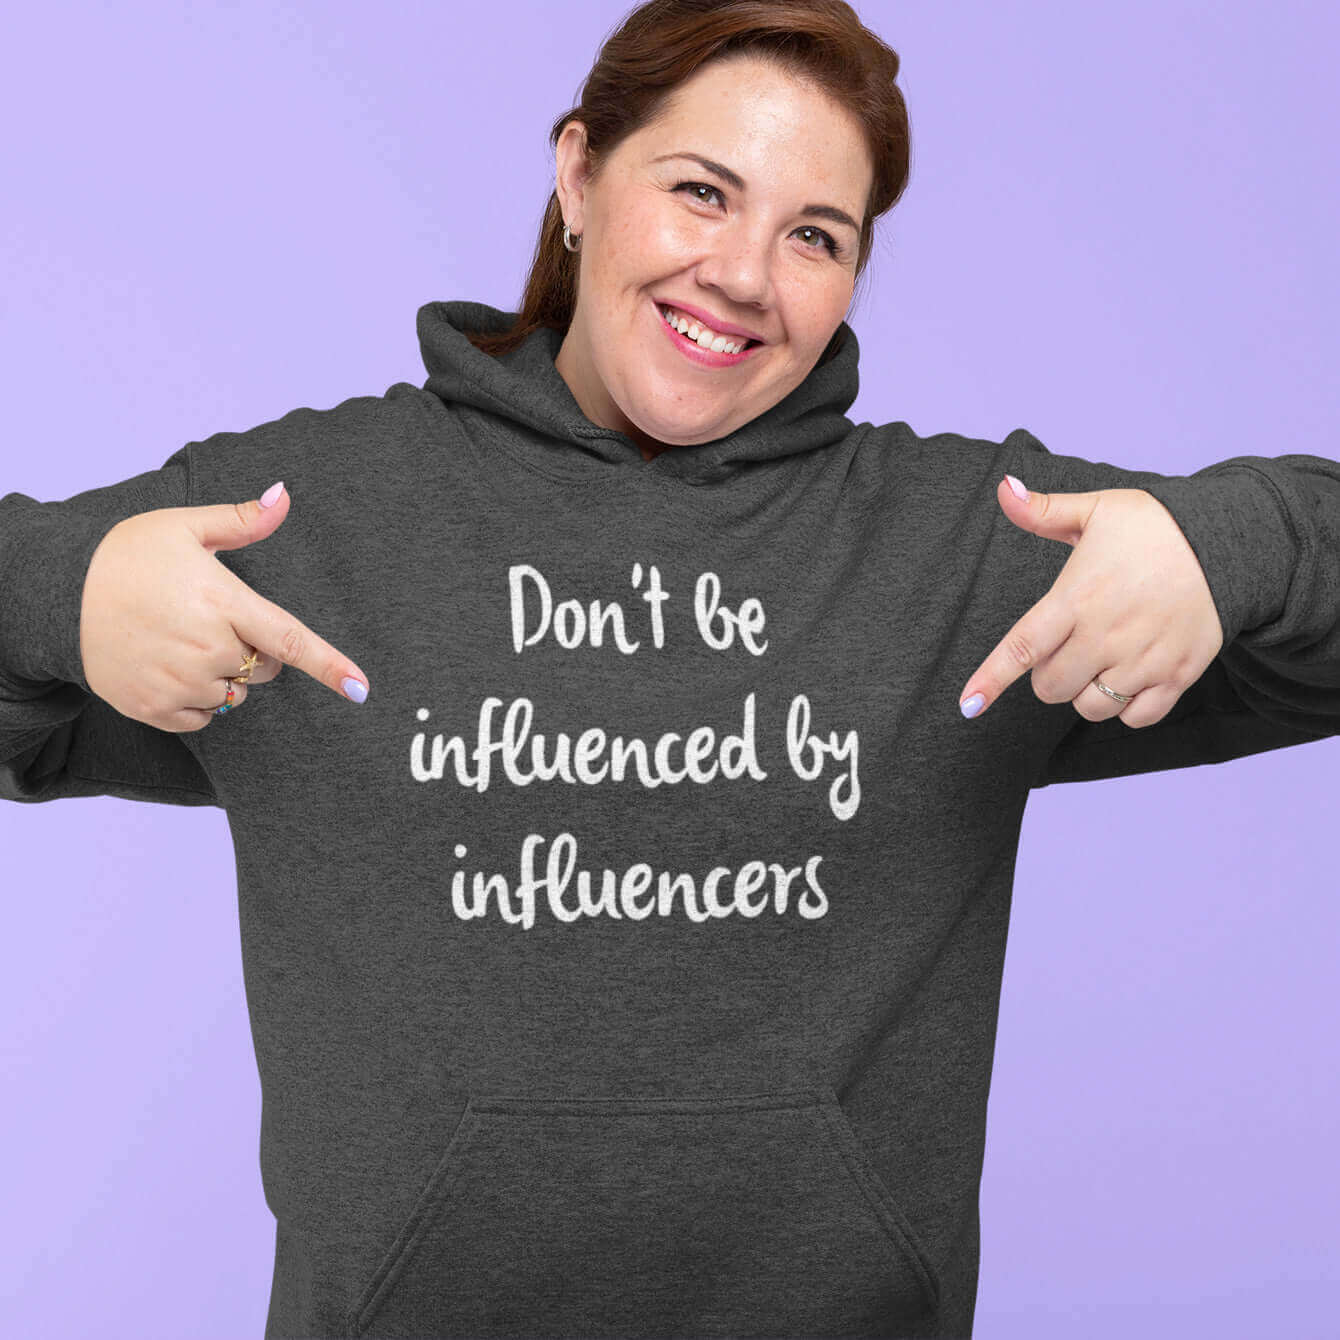 woman wearing dark gray hoodie that says don't be influenced by influencers social media influencer witticismsrus